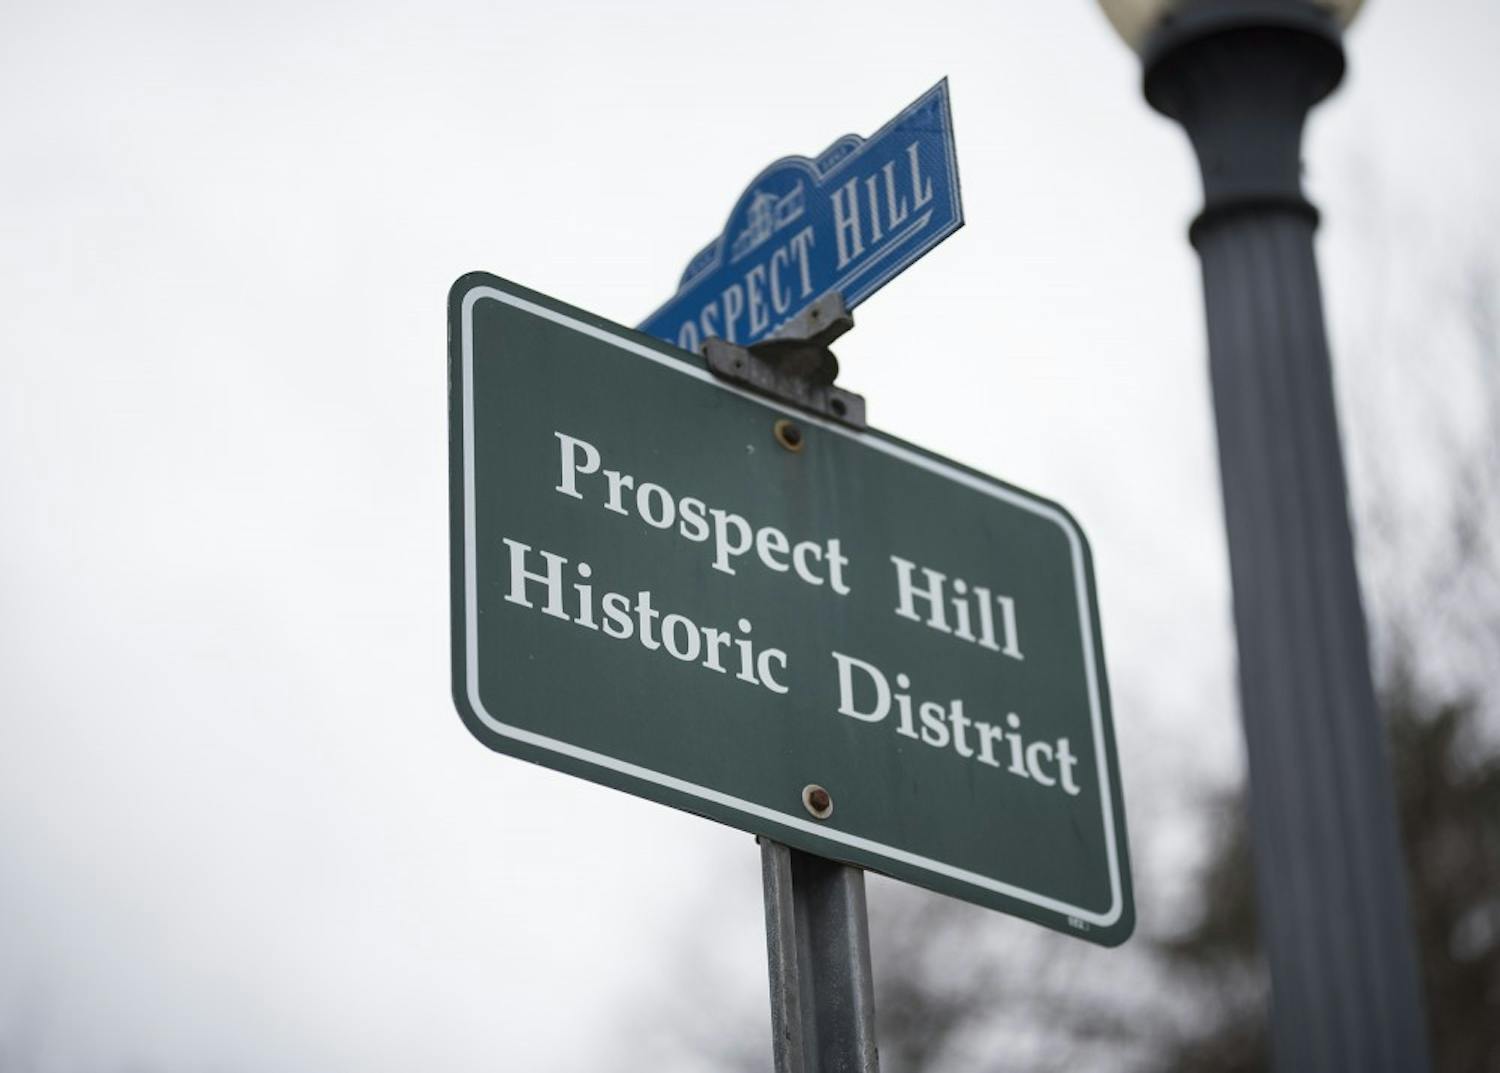 Prospect Hill historic district is located minutes from downtown Bloomington. Homeowners in historic districts must get any change to their houses, including installing solar panels, approved by the Historic Preservation Commission.